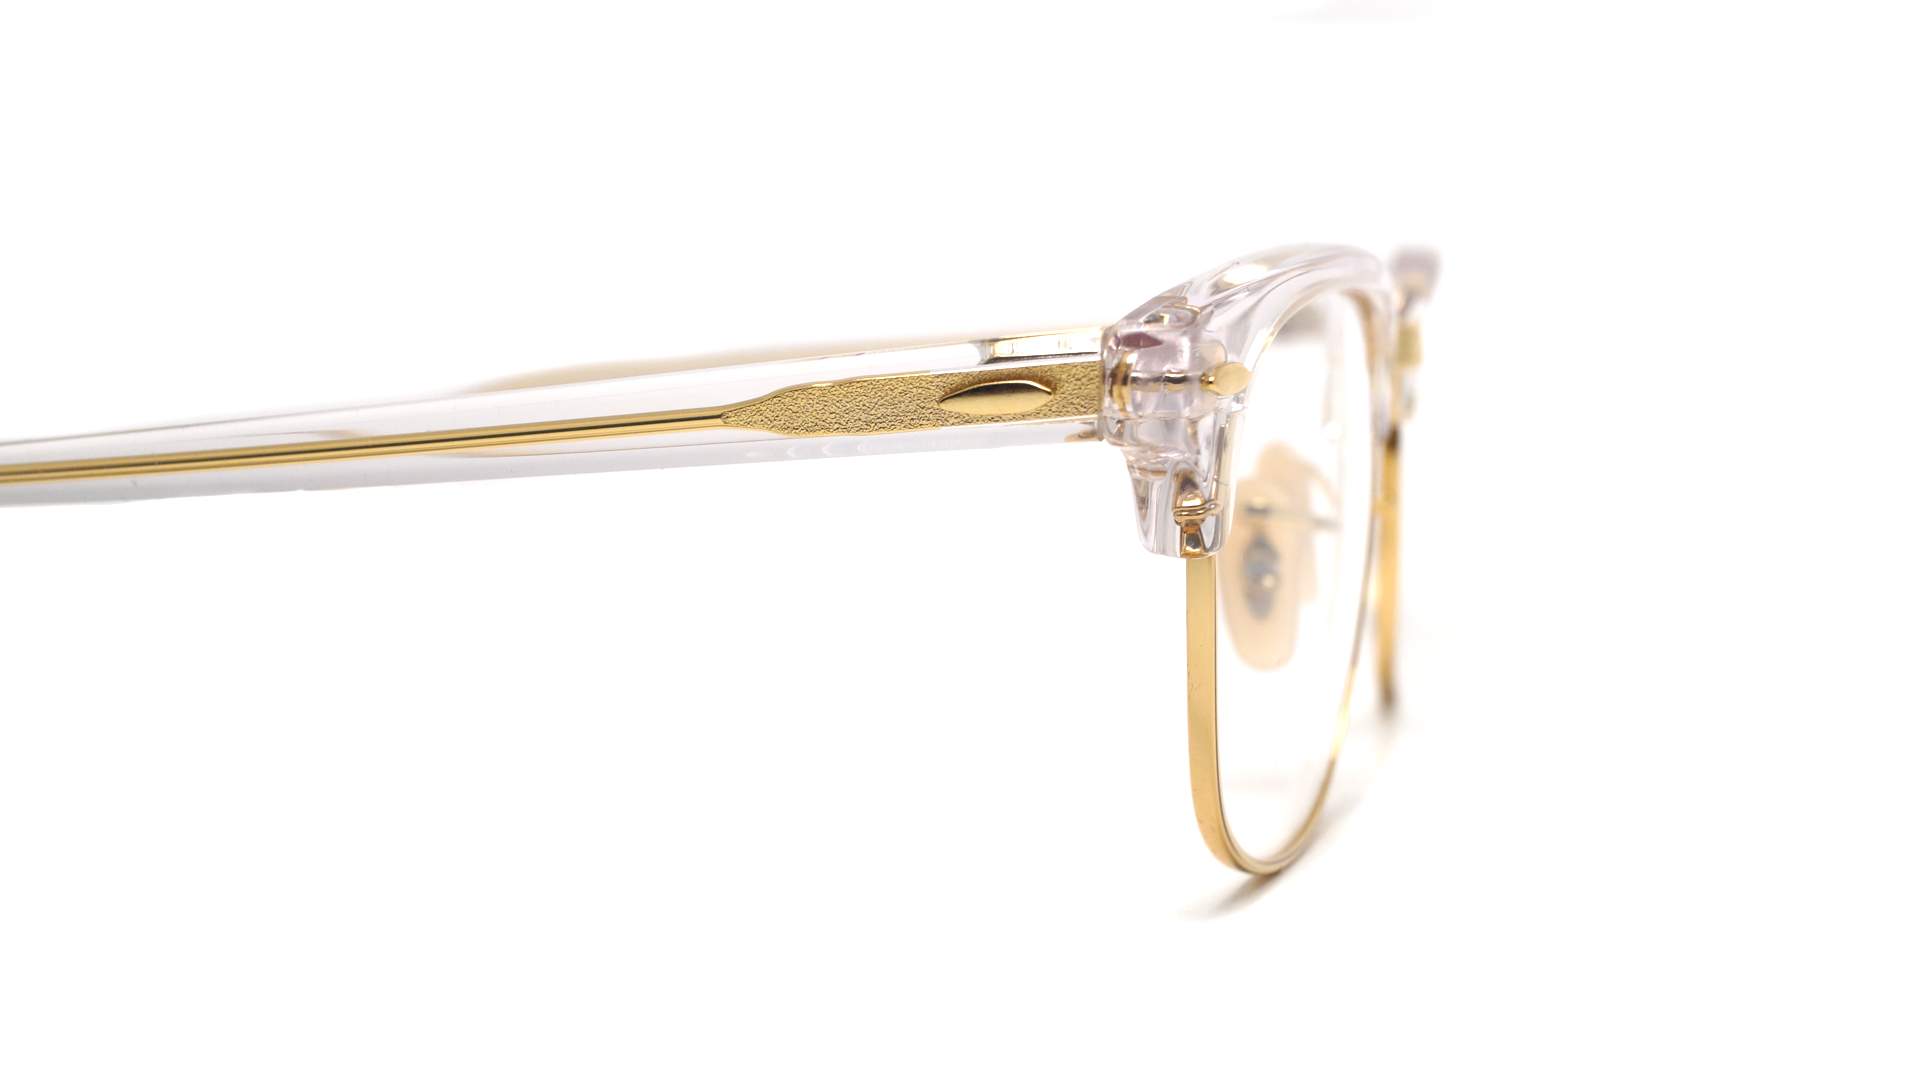 ray ban clear and gold glasses